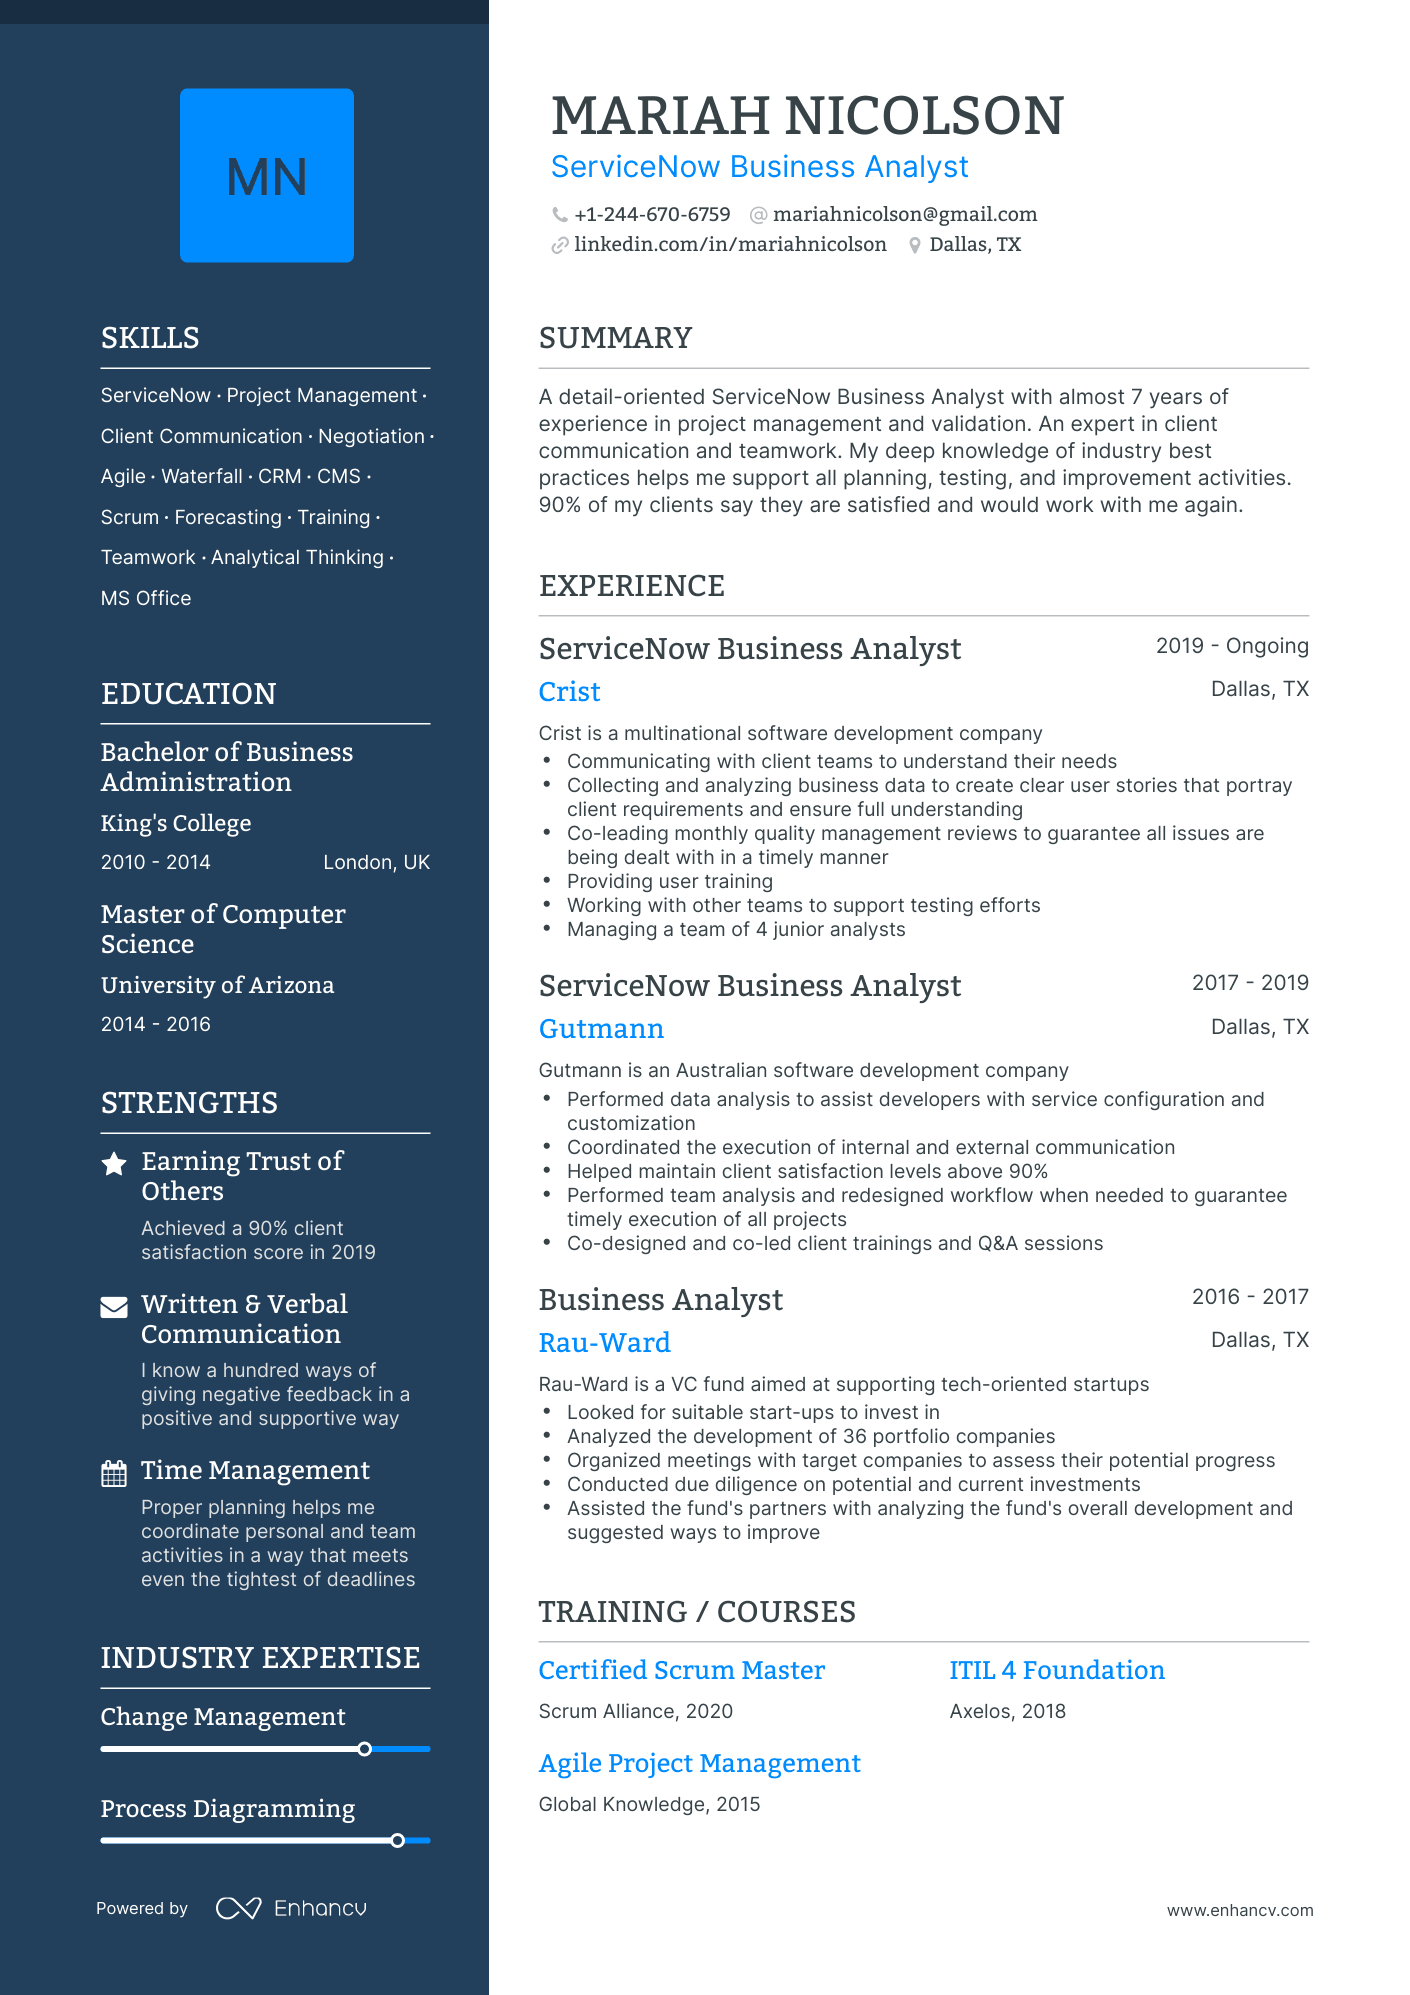 Polished ServiceNow Business Analyst Resume Template